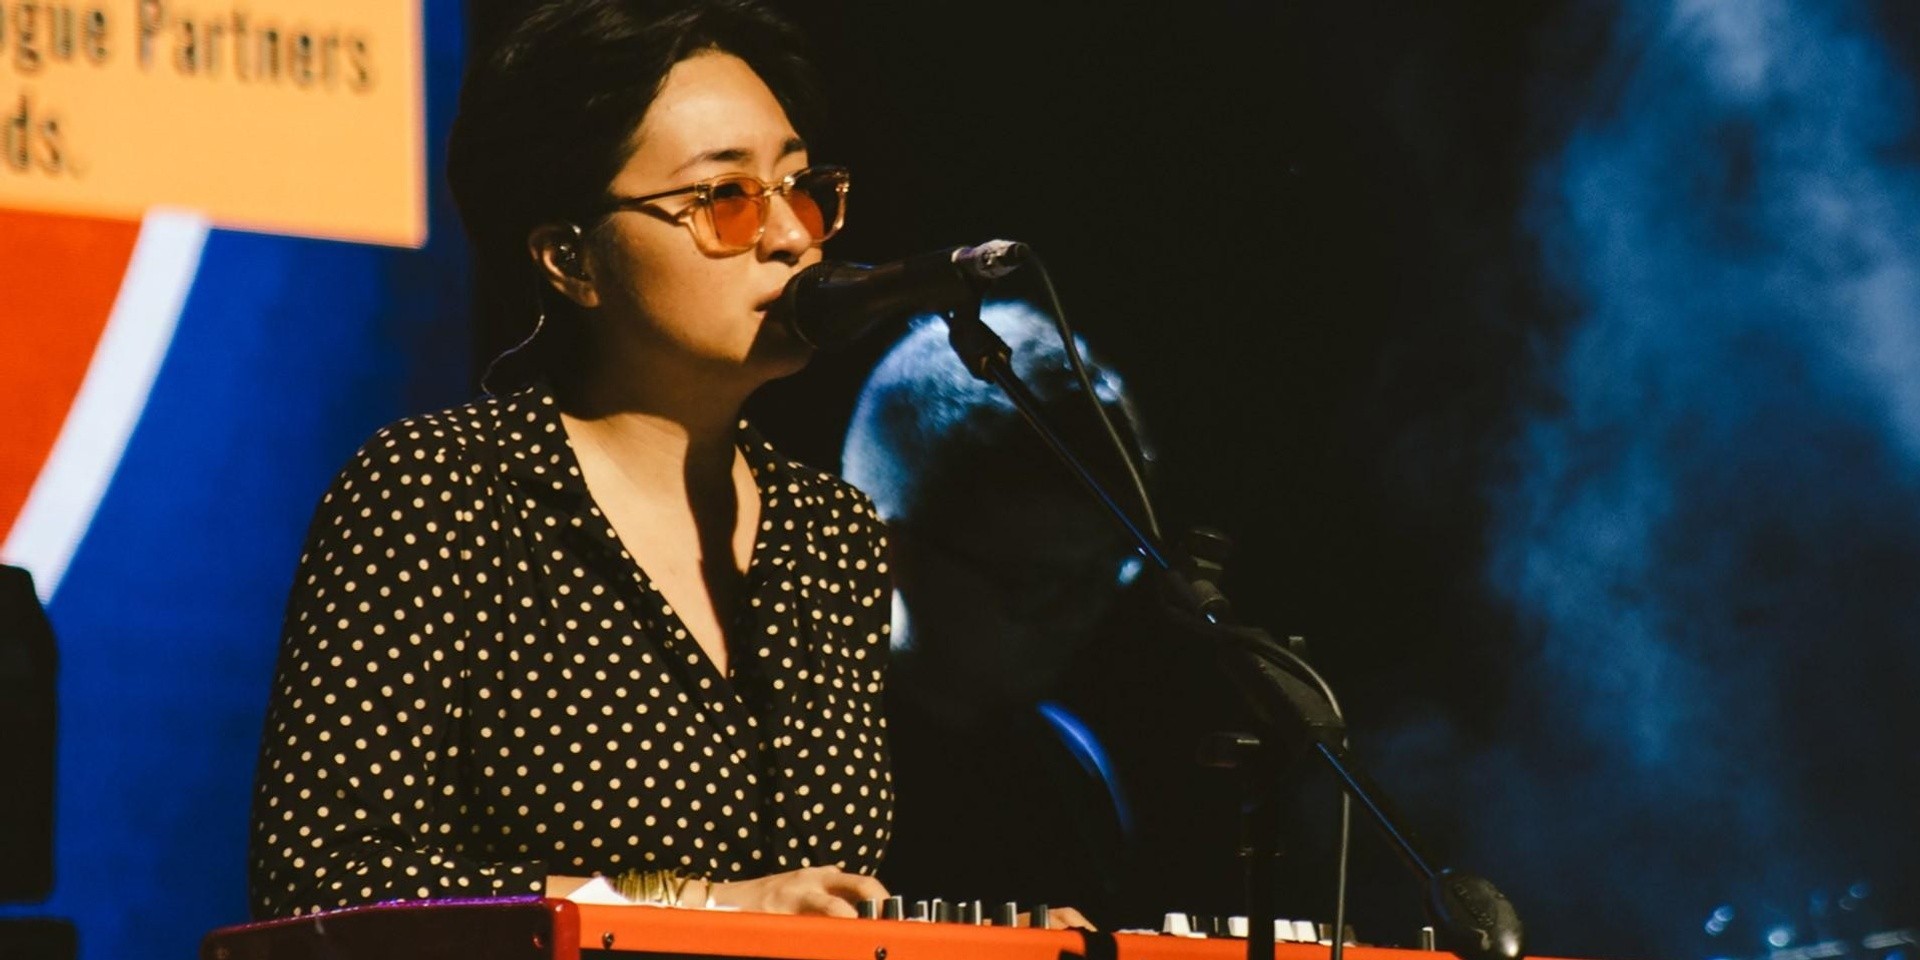 Armi Millare talks collaborating with D'Sound on 'Lykkelig' and coming up with the happiest lyric she has ever written